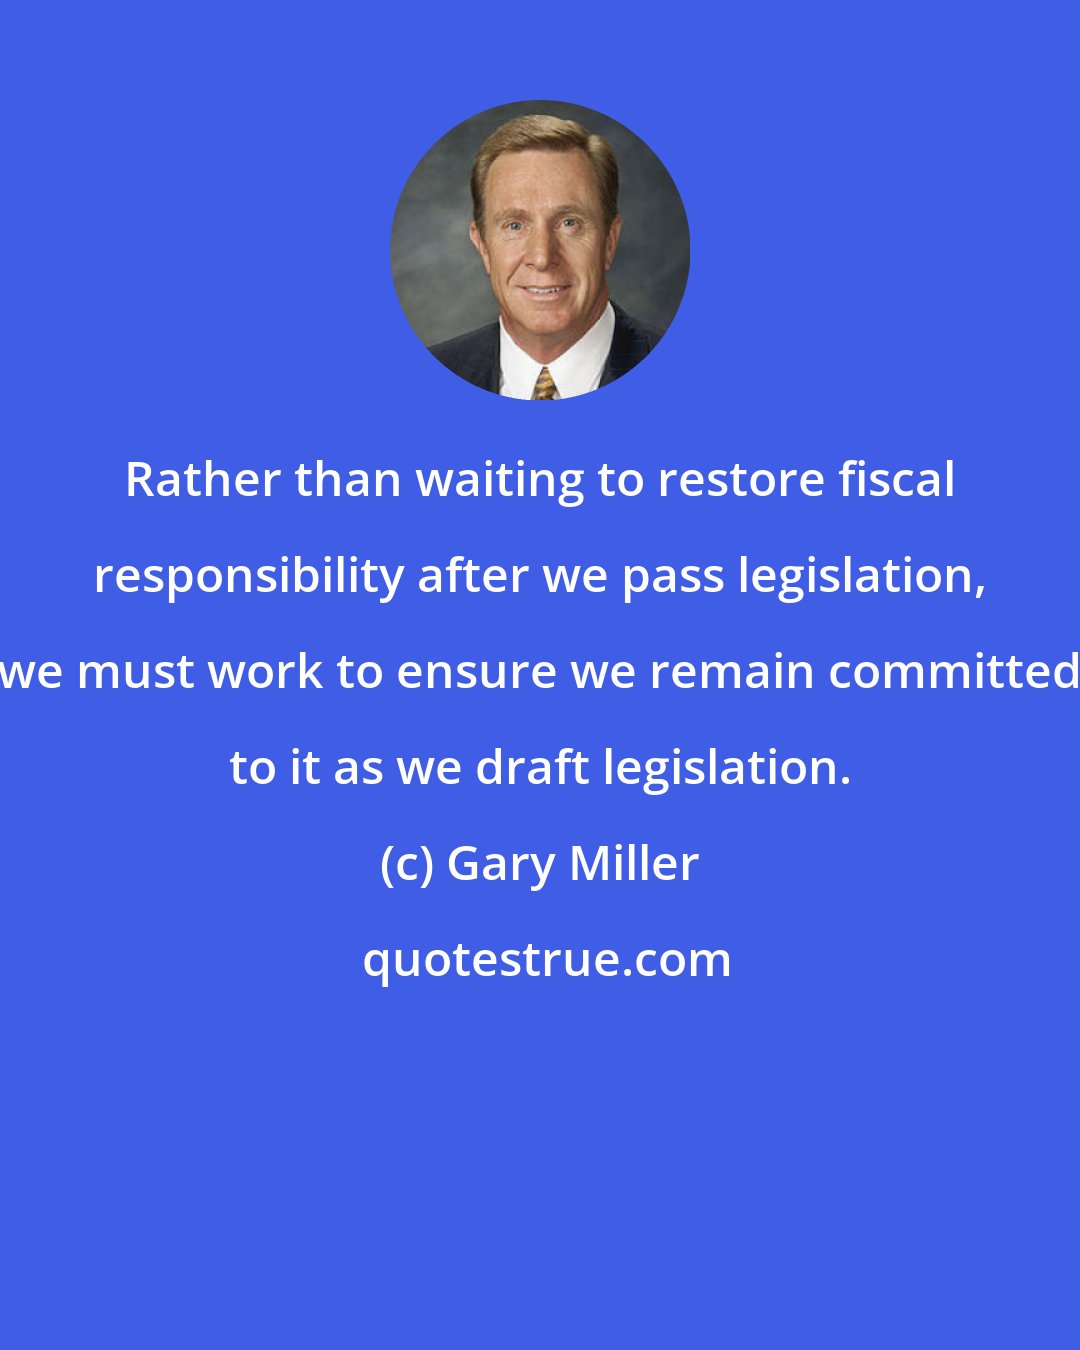 Gary Miller: Rather than waiting to restore fiscal responsibility after we pass legislation, we must work to ensure we remain committed to it as we draft legislation.